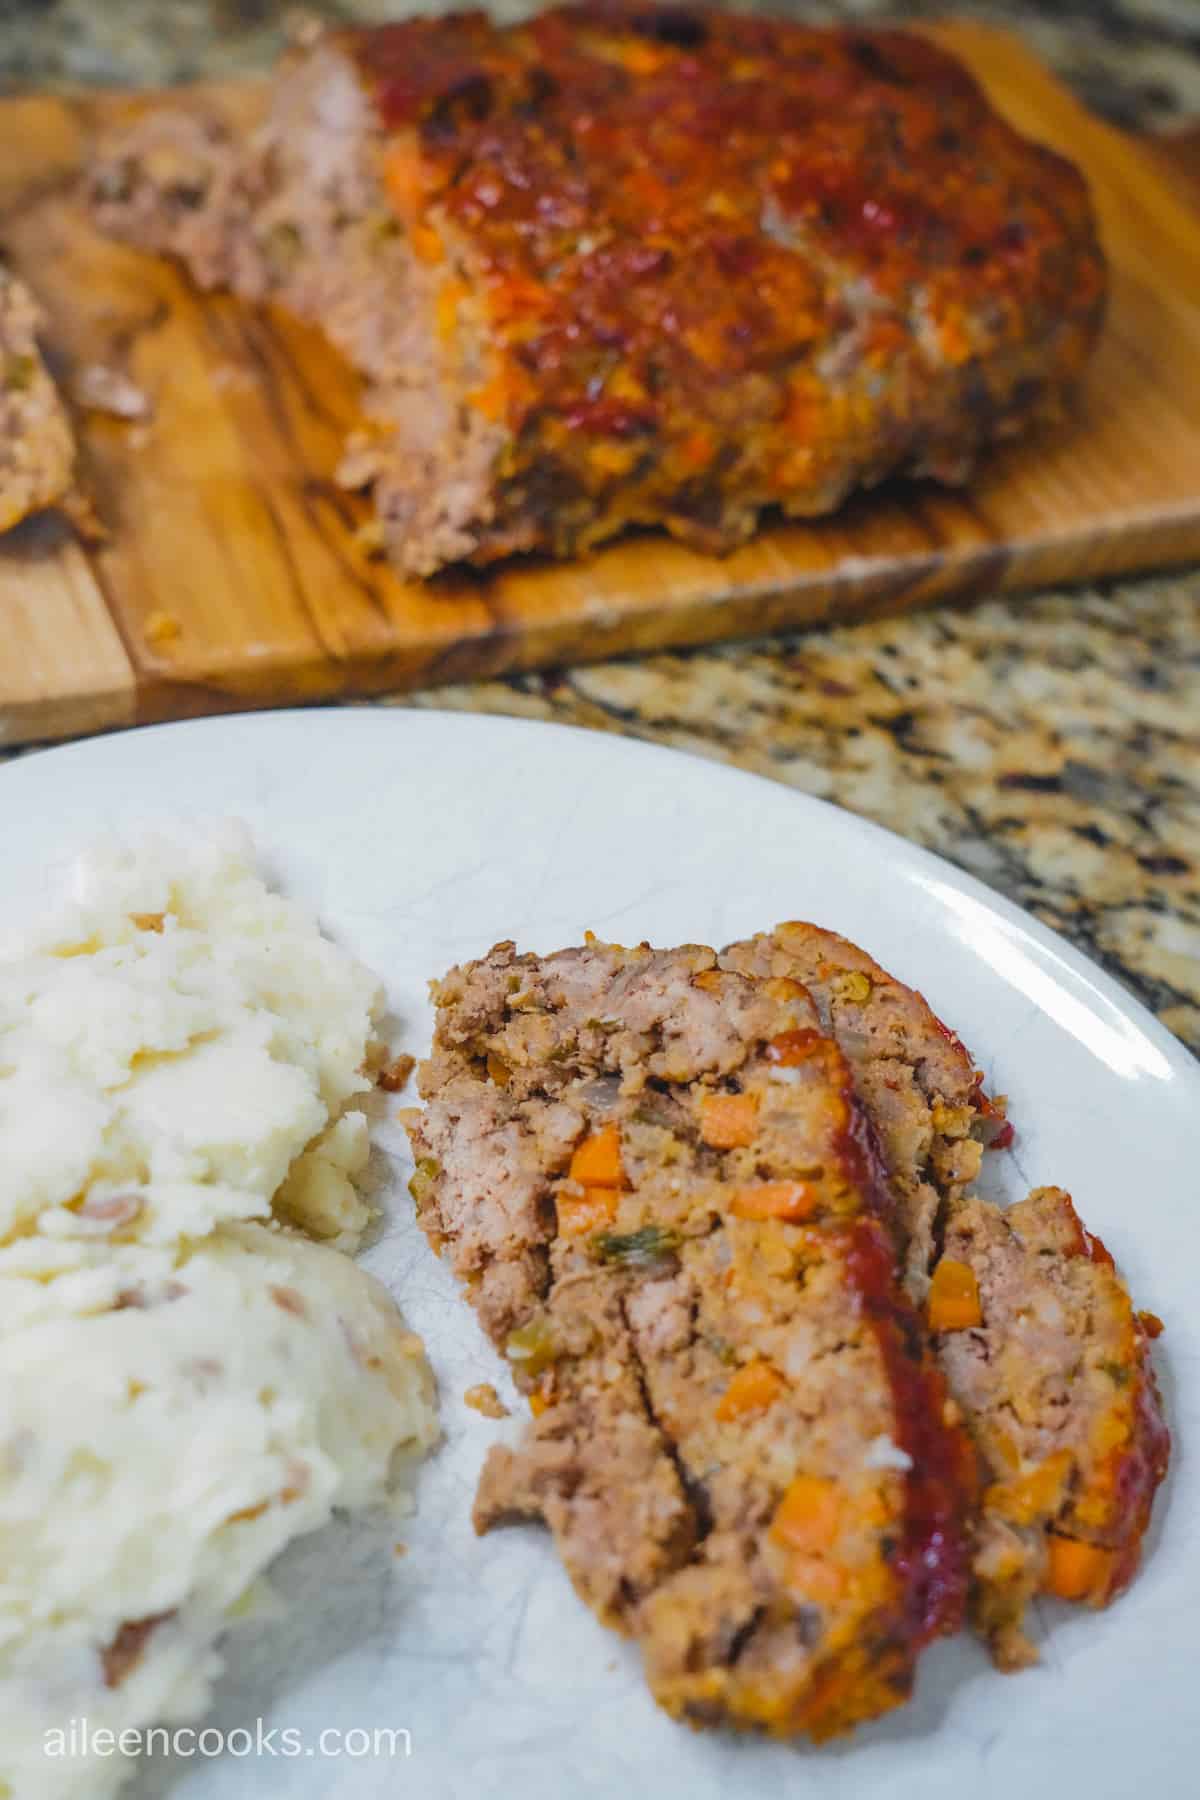 A plate of meatloaf and mashed potatoes in front of a whole meatloaf sliced up on a cutting board.